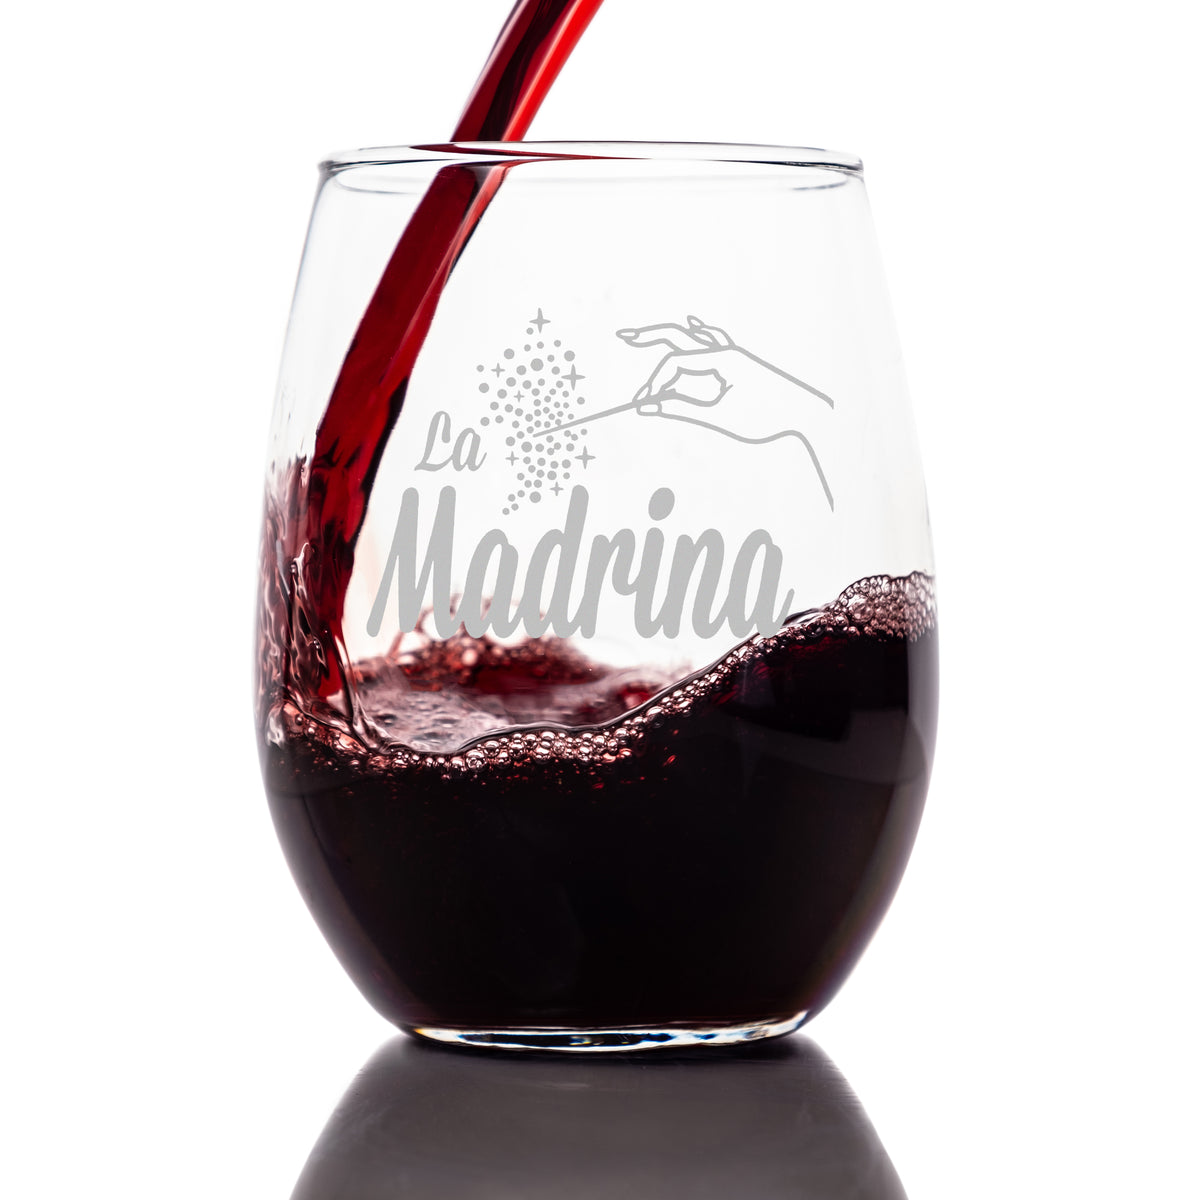 Premium Etched La Madrina Stemless Glass, Matches El Padrino Glass For Padrinos Glass Gift Set